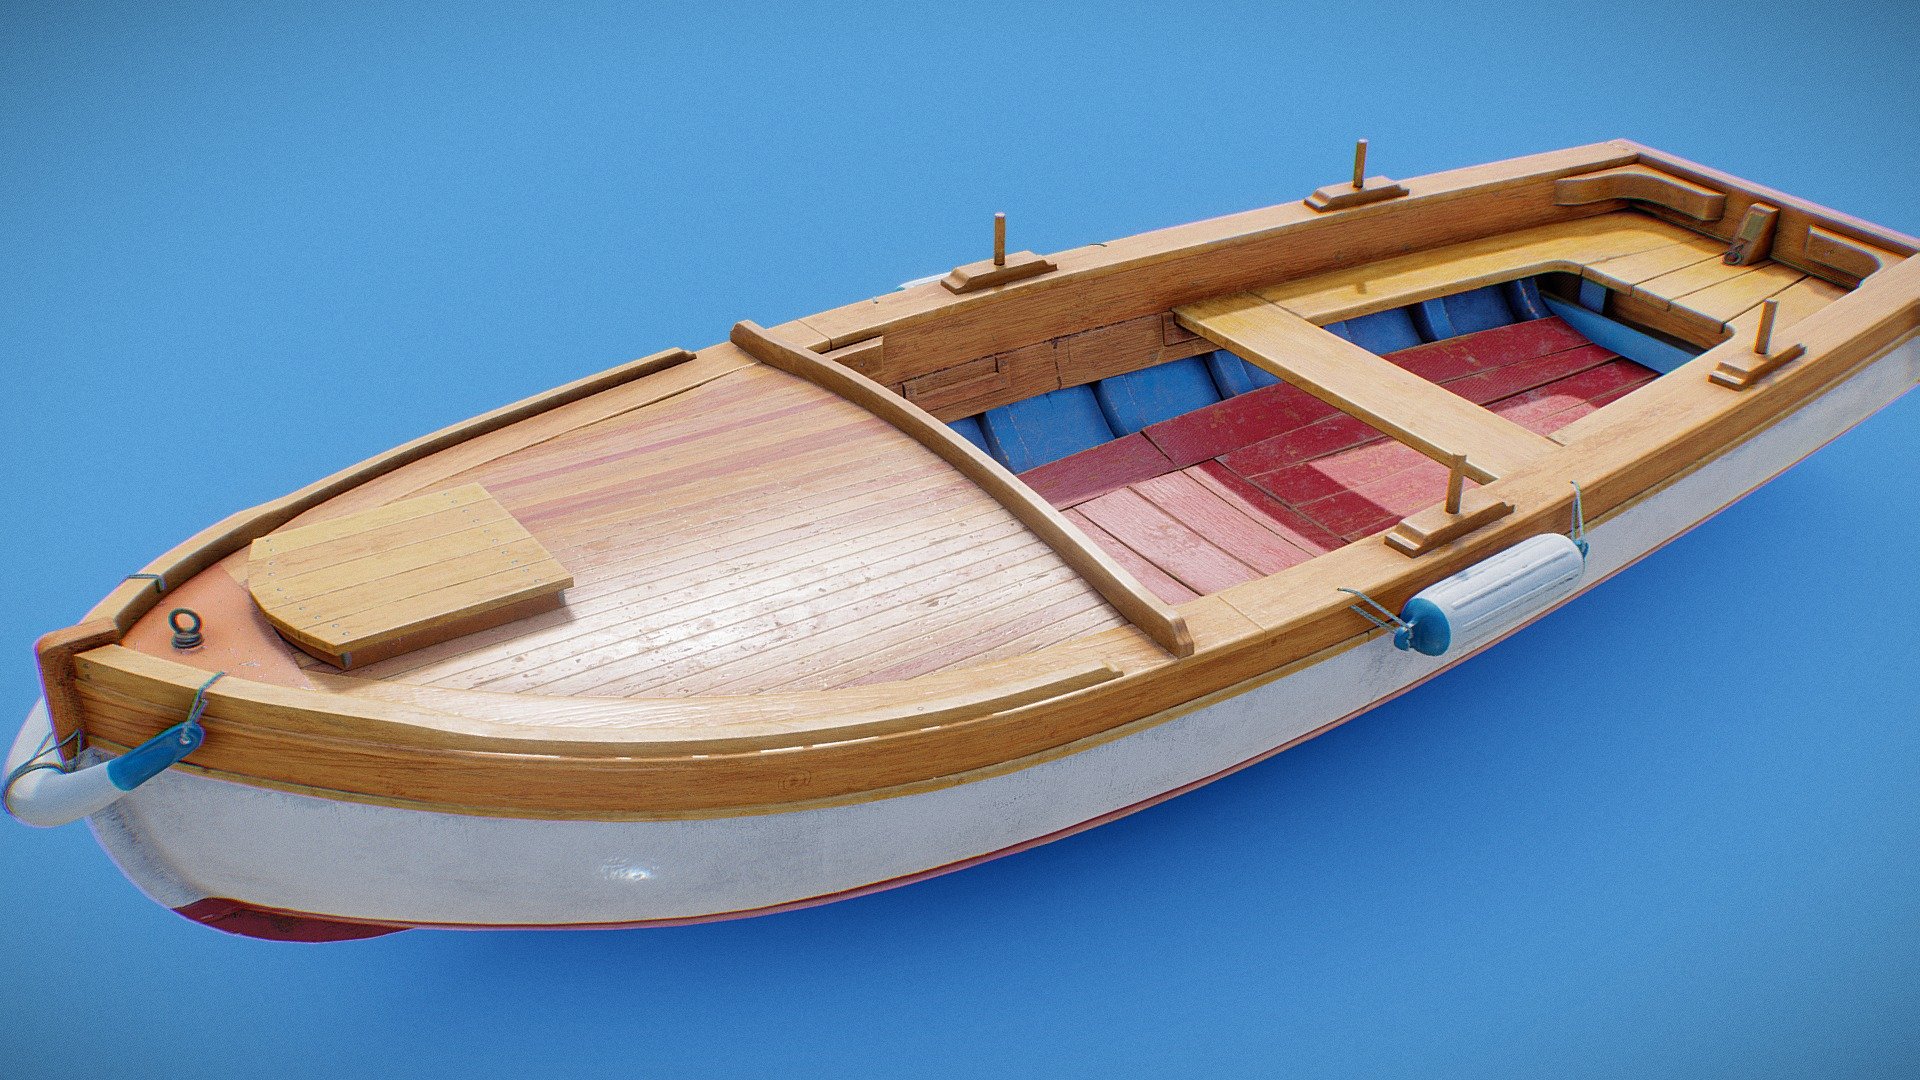 Highly detailed rowboat
30048 tris.

4096x4096 (Albedo, Metalic, Roughness, Normal) - Rowboat - 3D model by Serhii3D 3d model